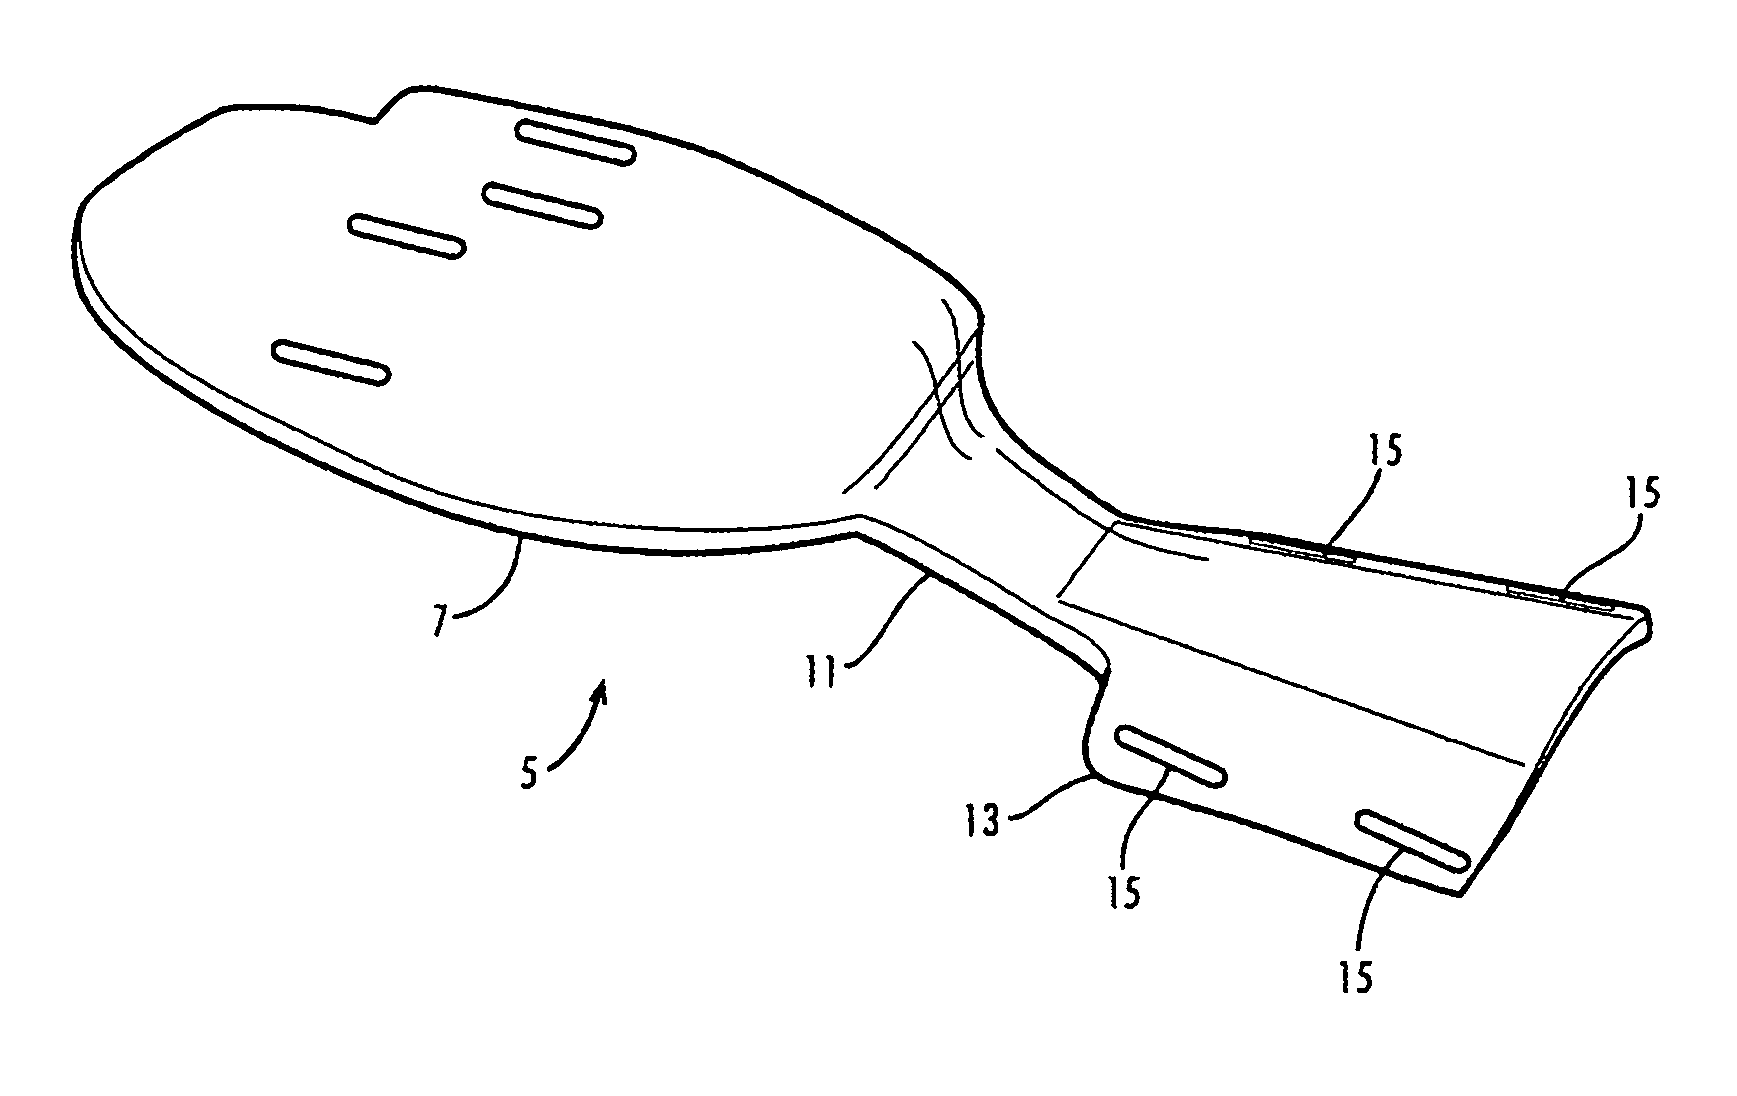 Aquatic propulsion device for swimmers